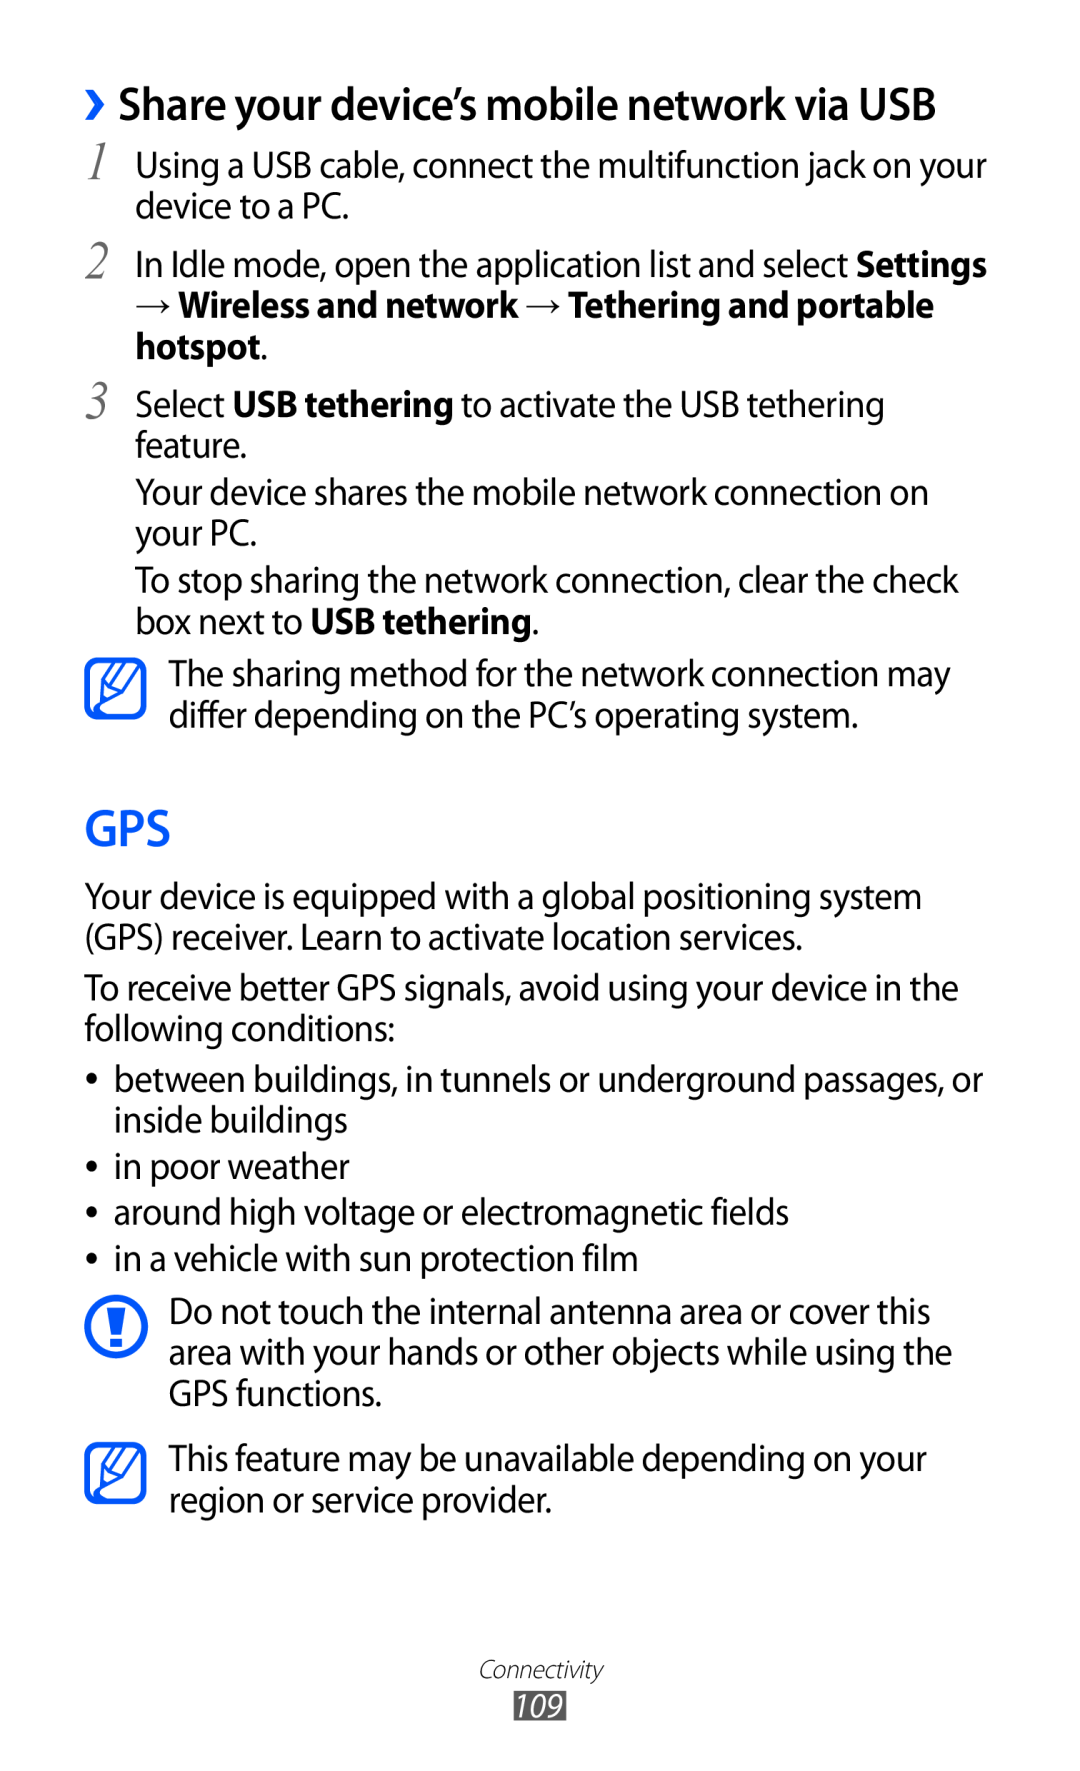 Samsung GT-I9070 ››Share your device’s mobile network via USB, → Wireless and network → Tethering and portable hotspot 